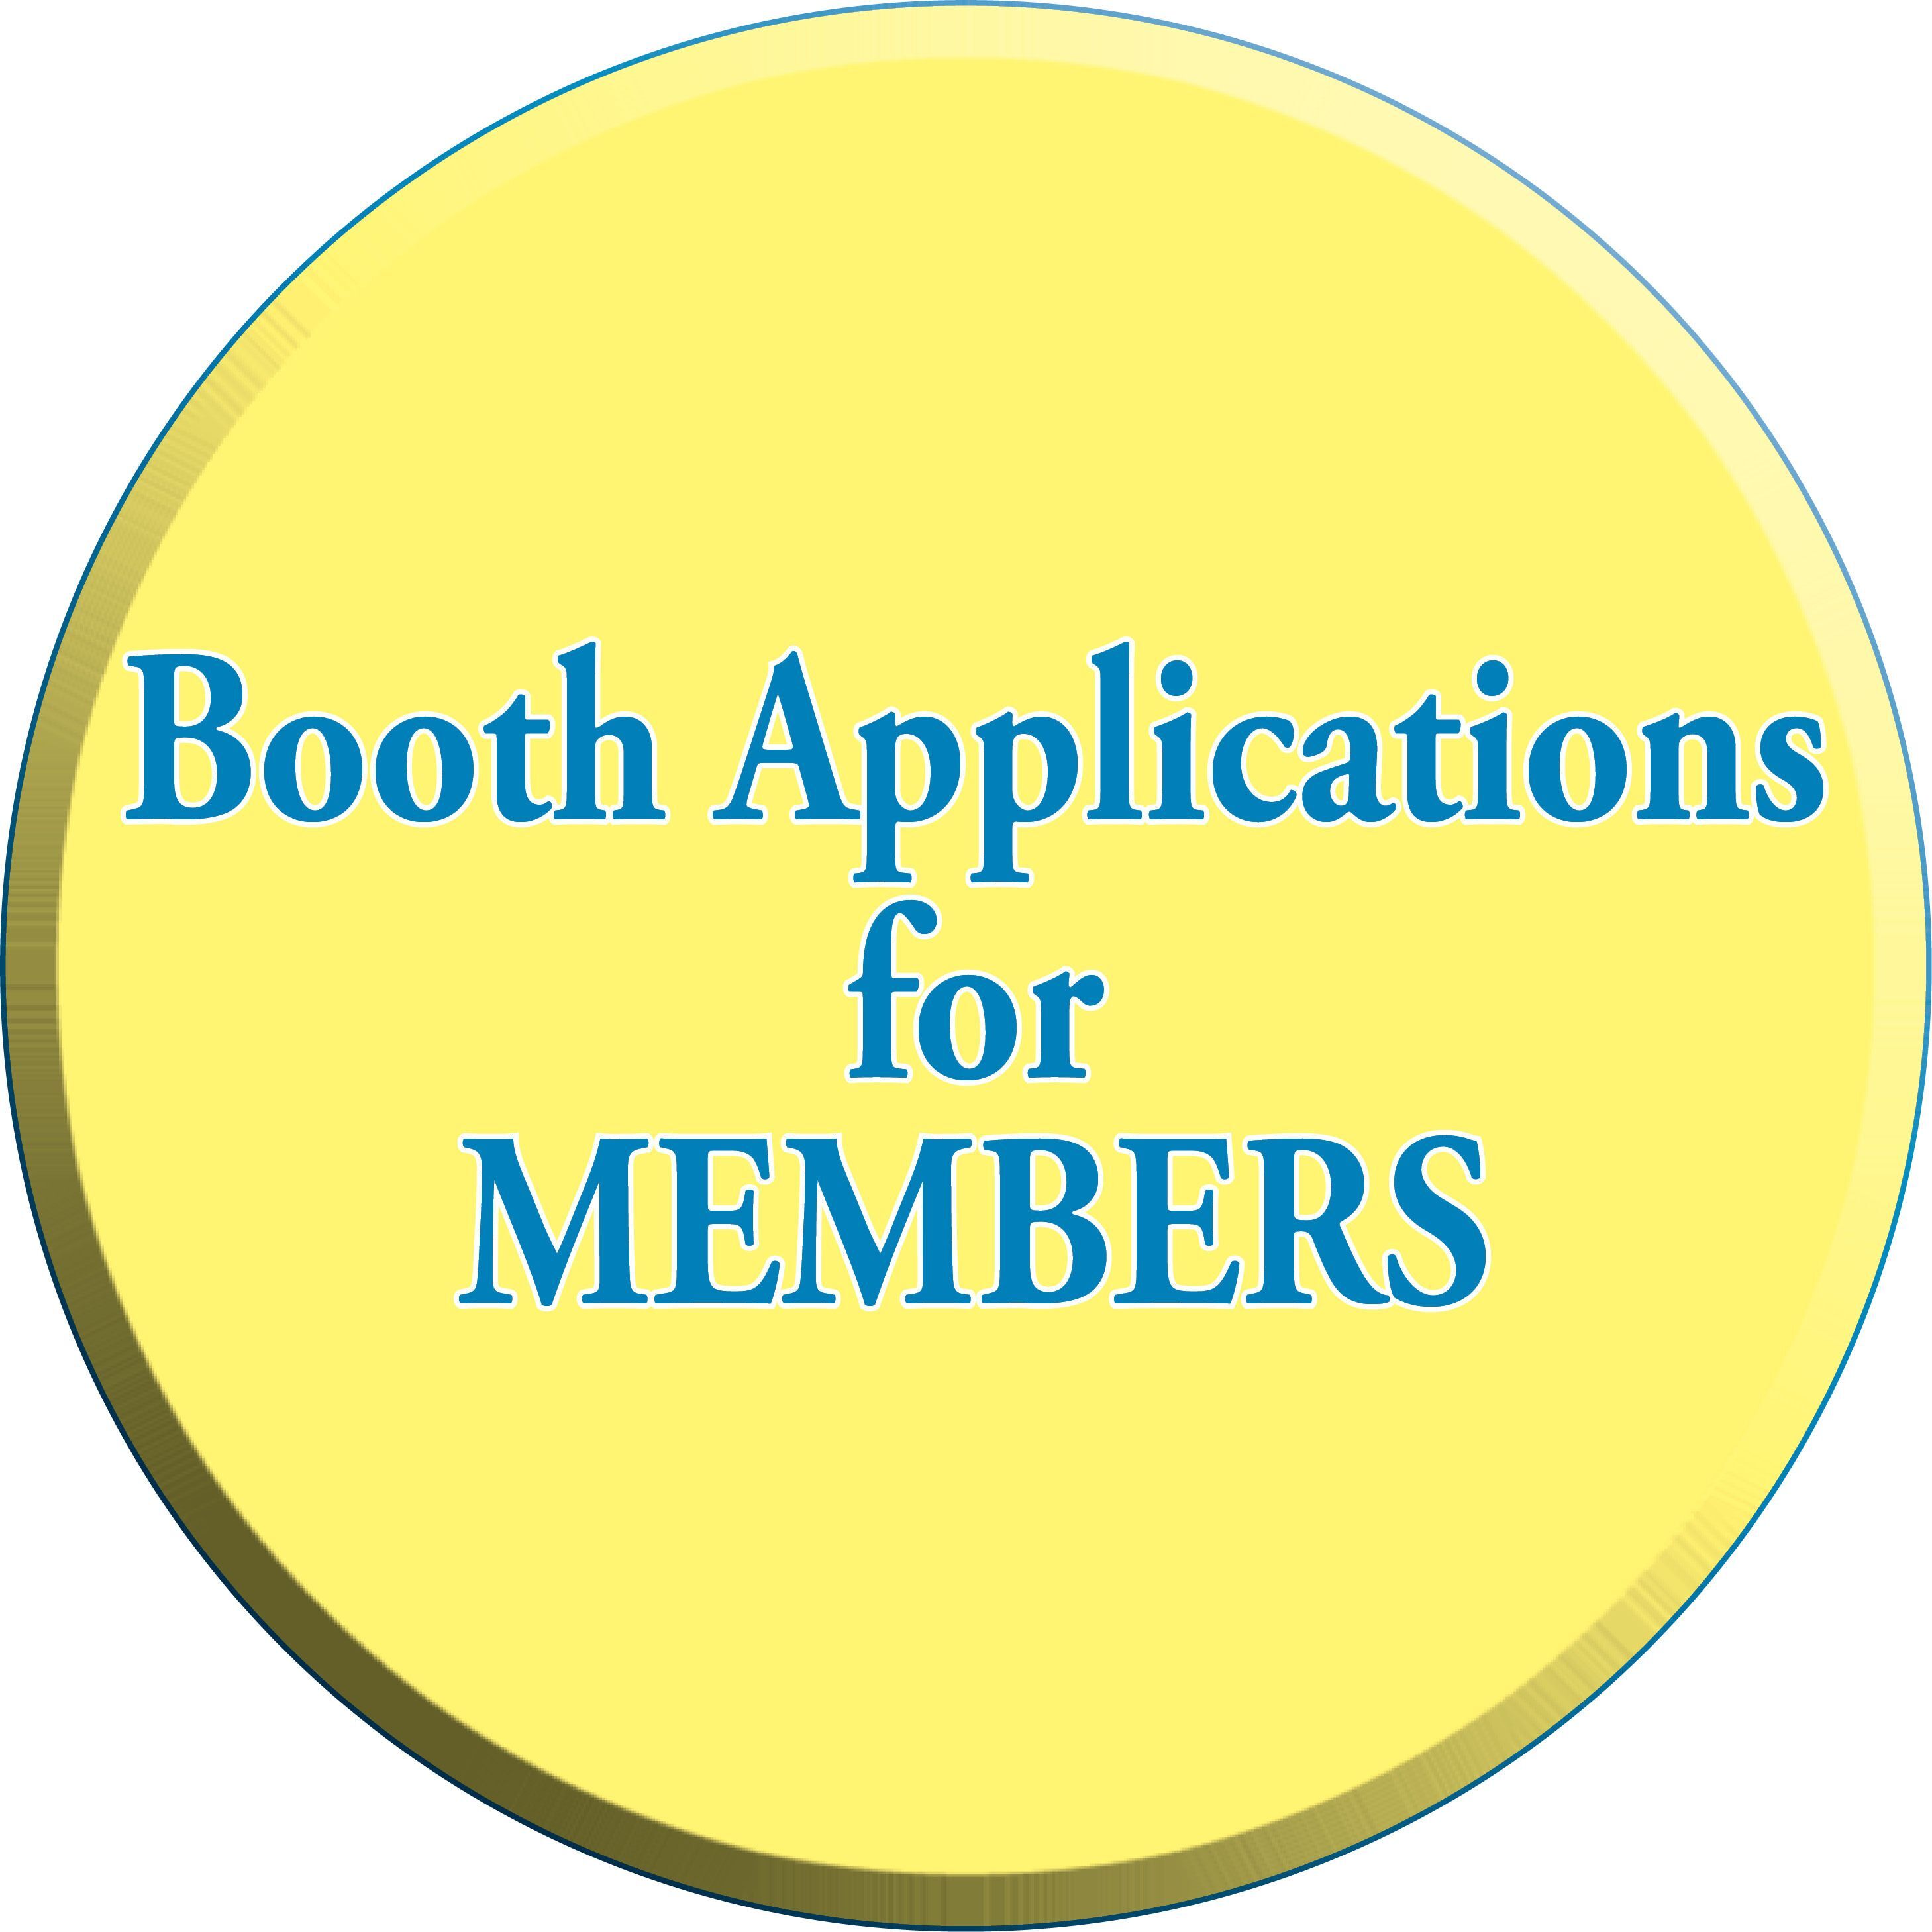 Online Booth Application for Members